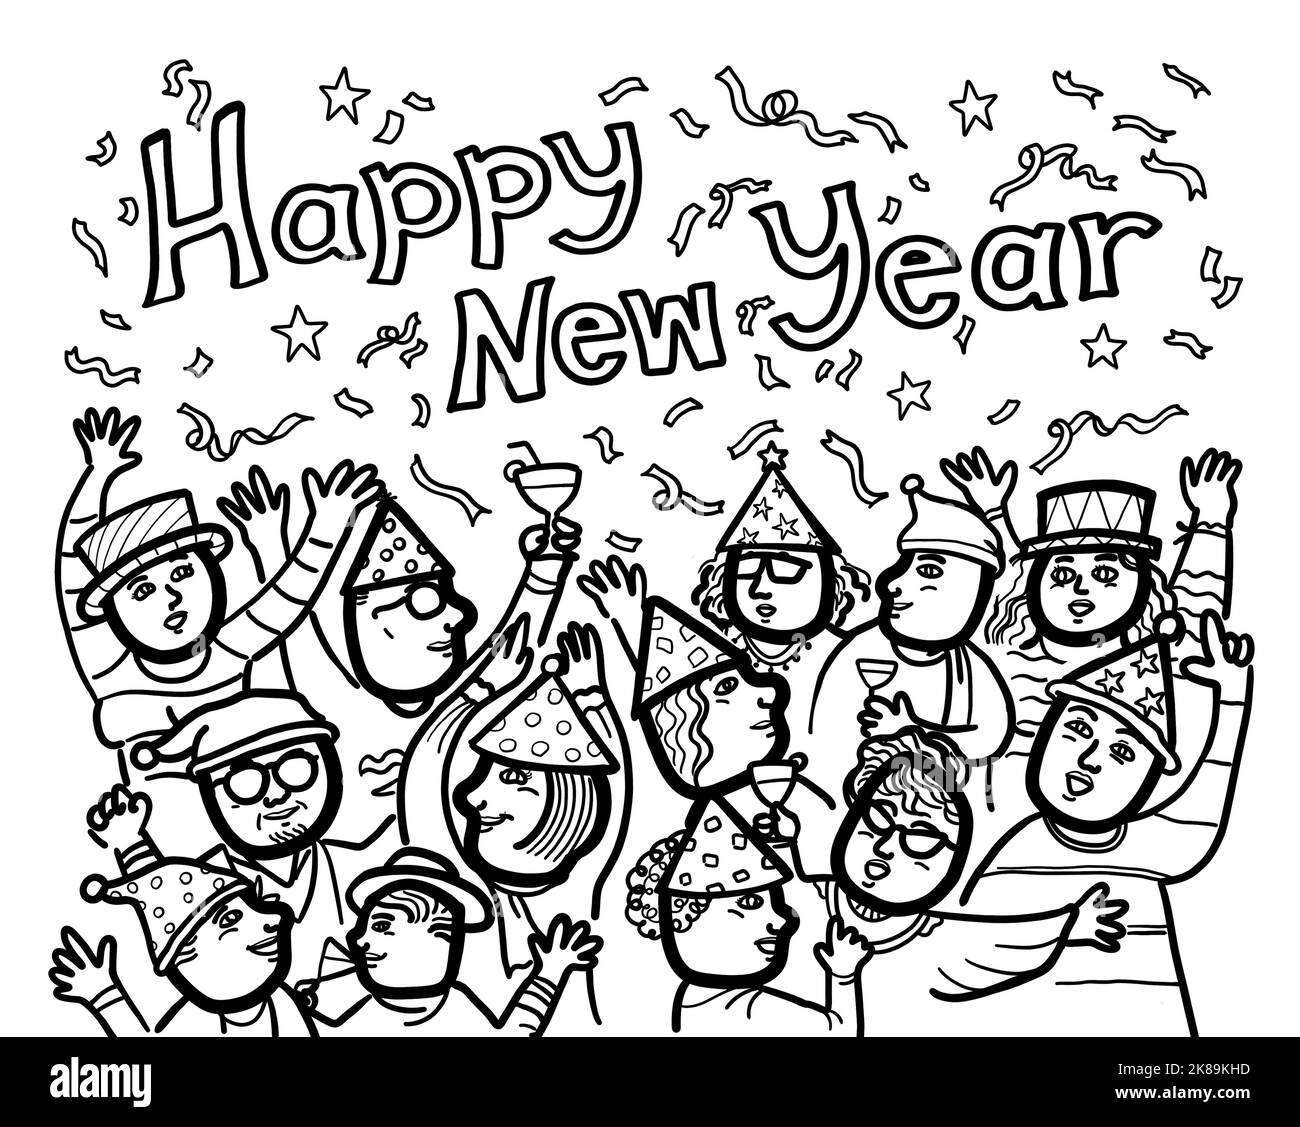 Illustration of multi-ethnic and mixed age group of people celebrate the New Years party. Black and white line drawing with Happy New Year handwritten Stock Photo